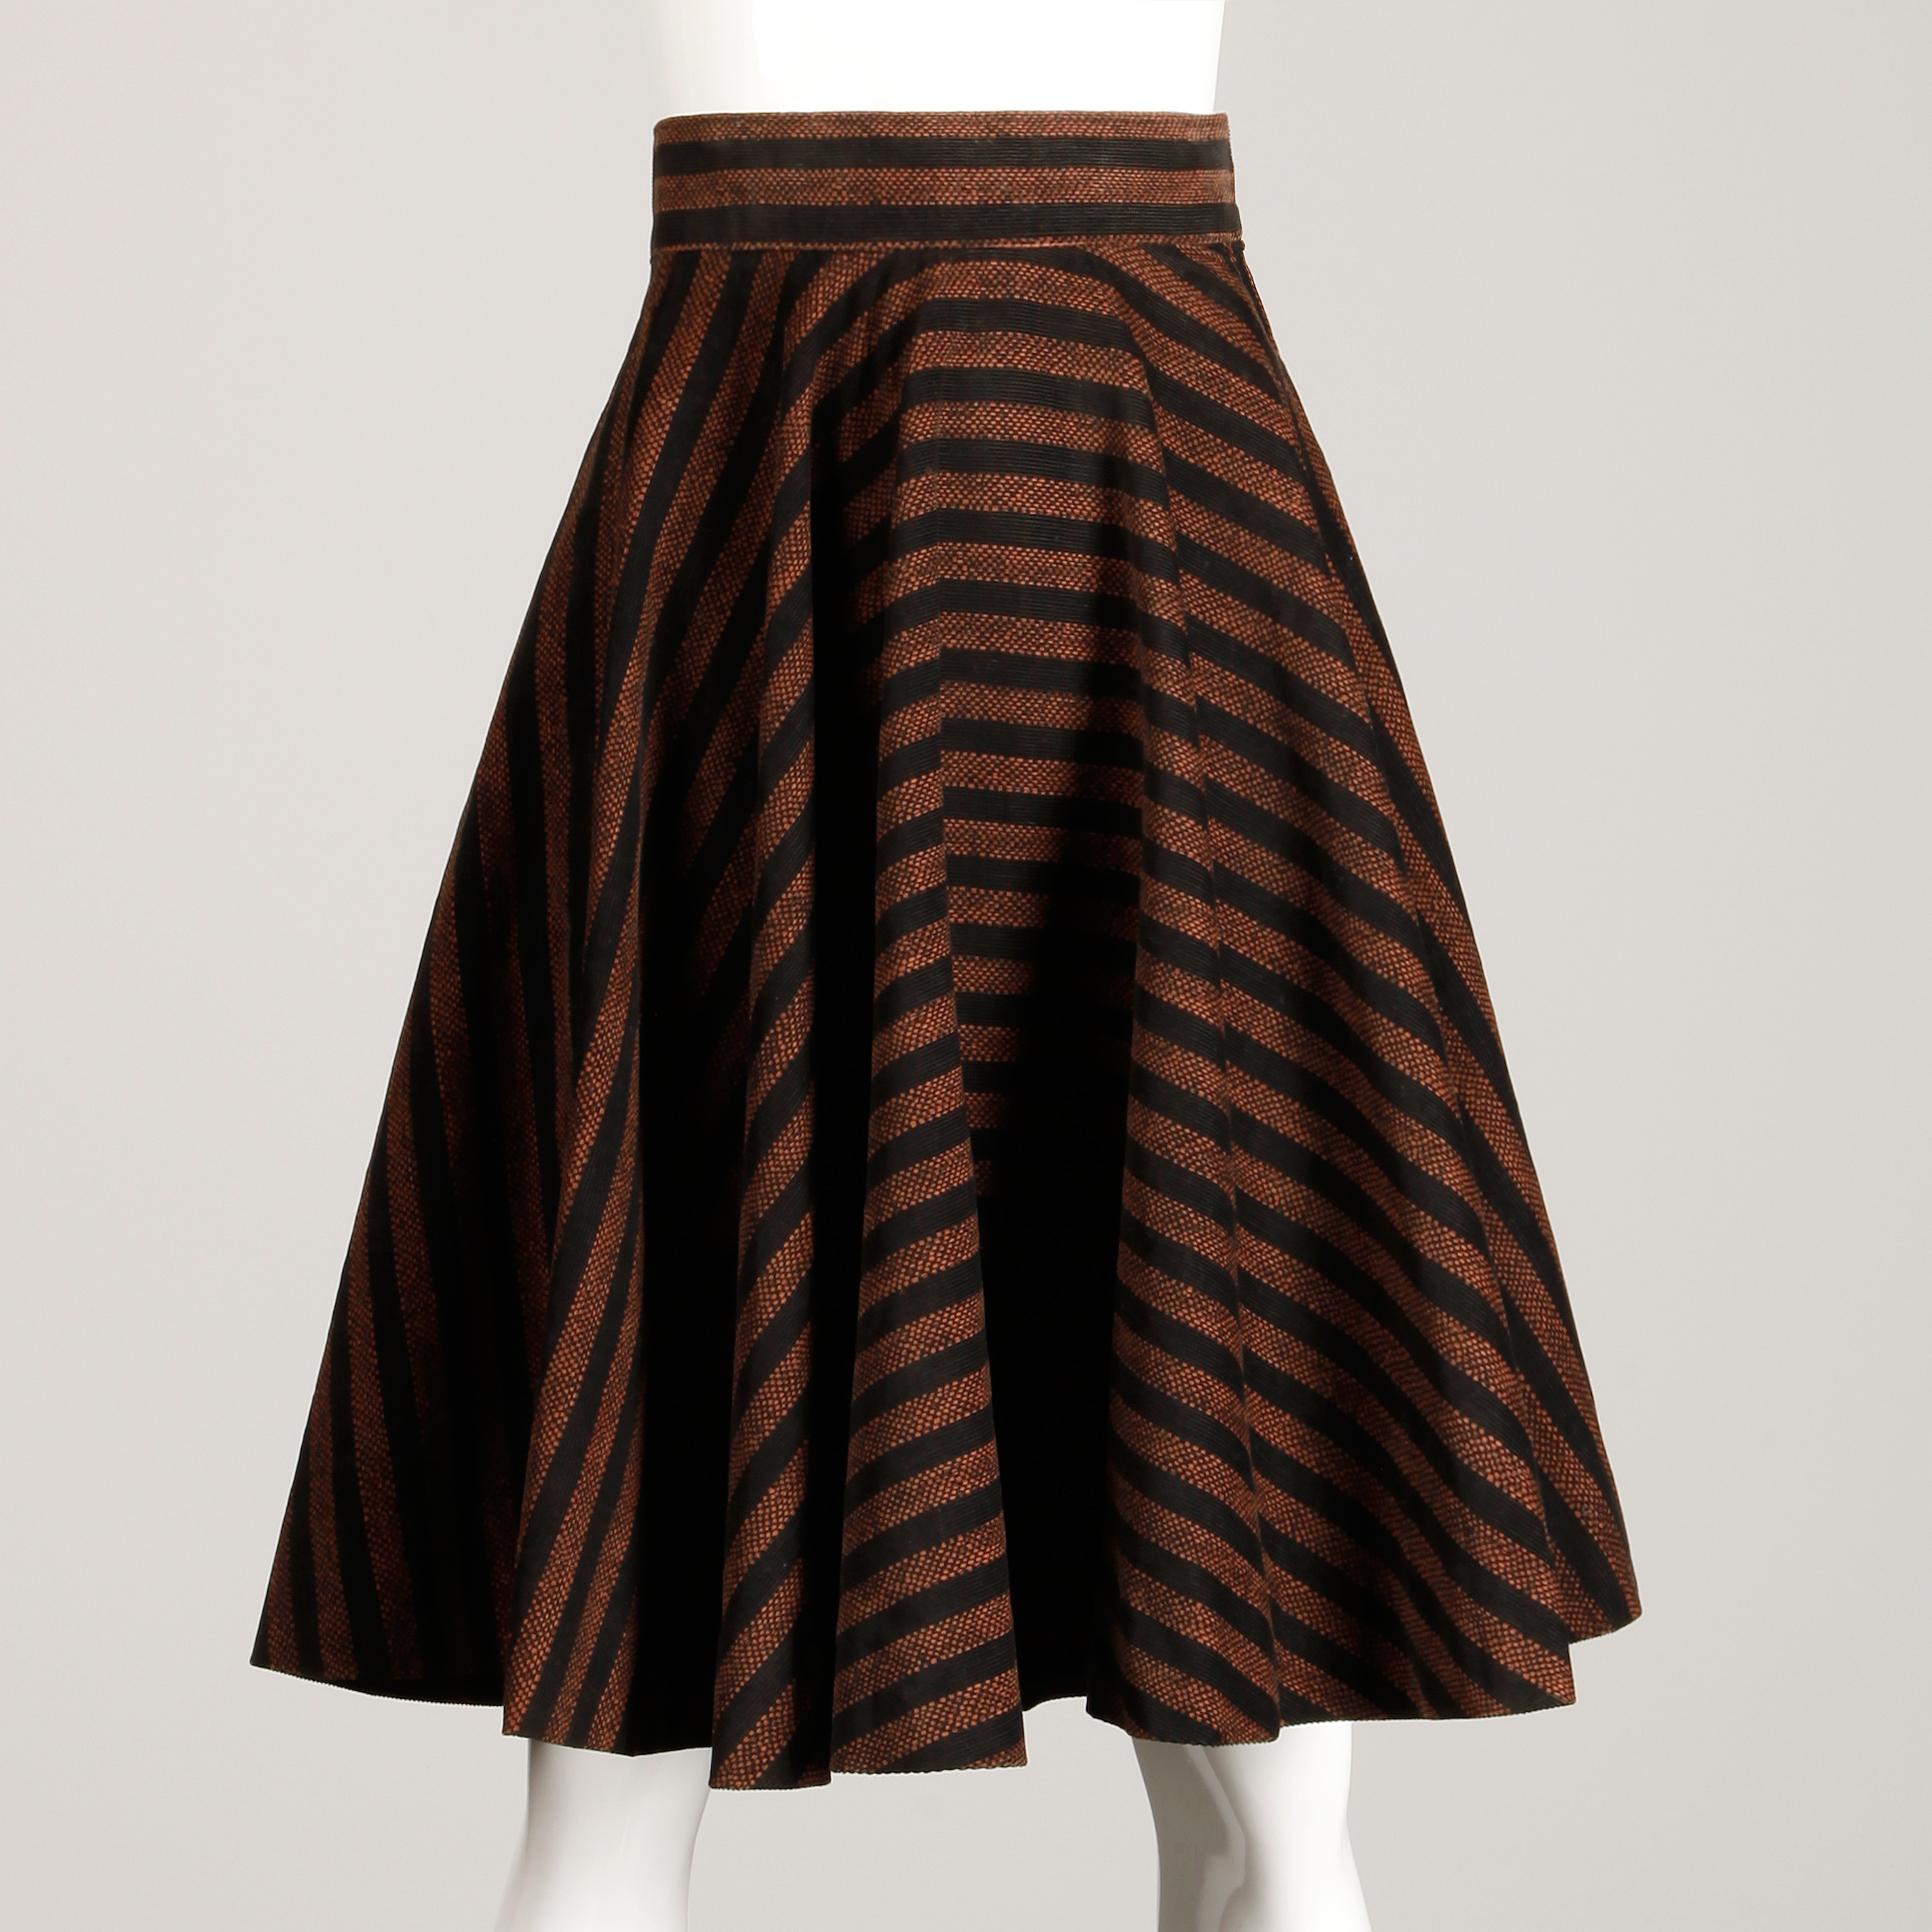 Vintage 1950s circle skirt in a brown and black striped corduroy style fabric. Unlined with side metal zip and hook closure. Fits like a modern XS. The waist measures 22